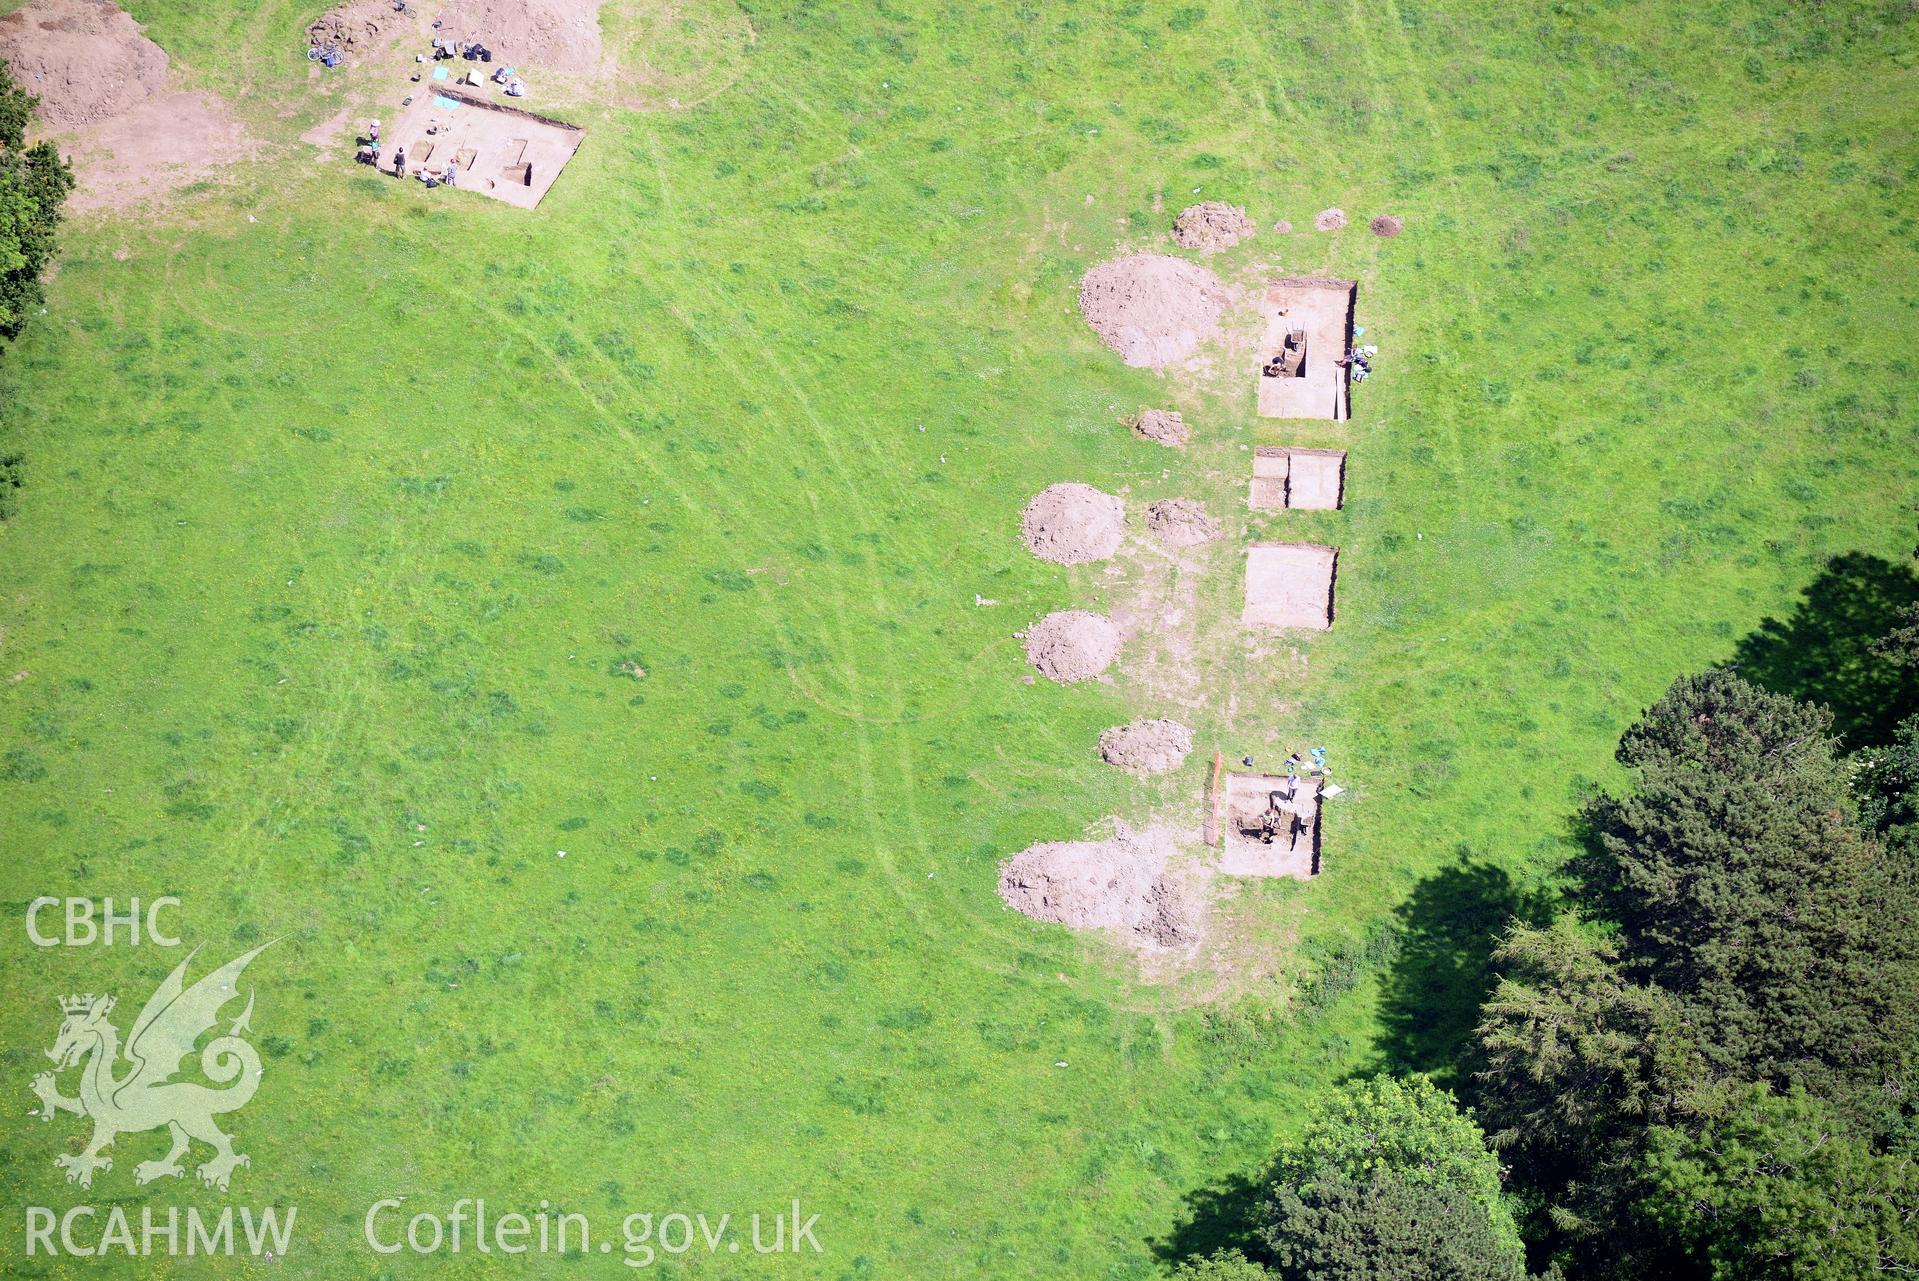 Excavation of Caerau Hillfort, Ely, conducted by Cardiff University. Oblique aerial photograph taken during the Royal Commission's programme of archaeological aerial reconnaissance by Toby Driver on 29th June 2015.